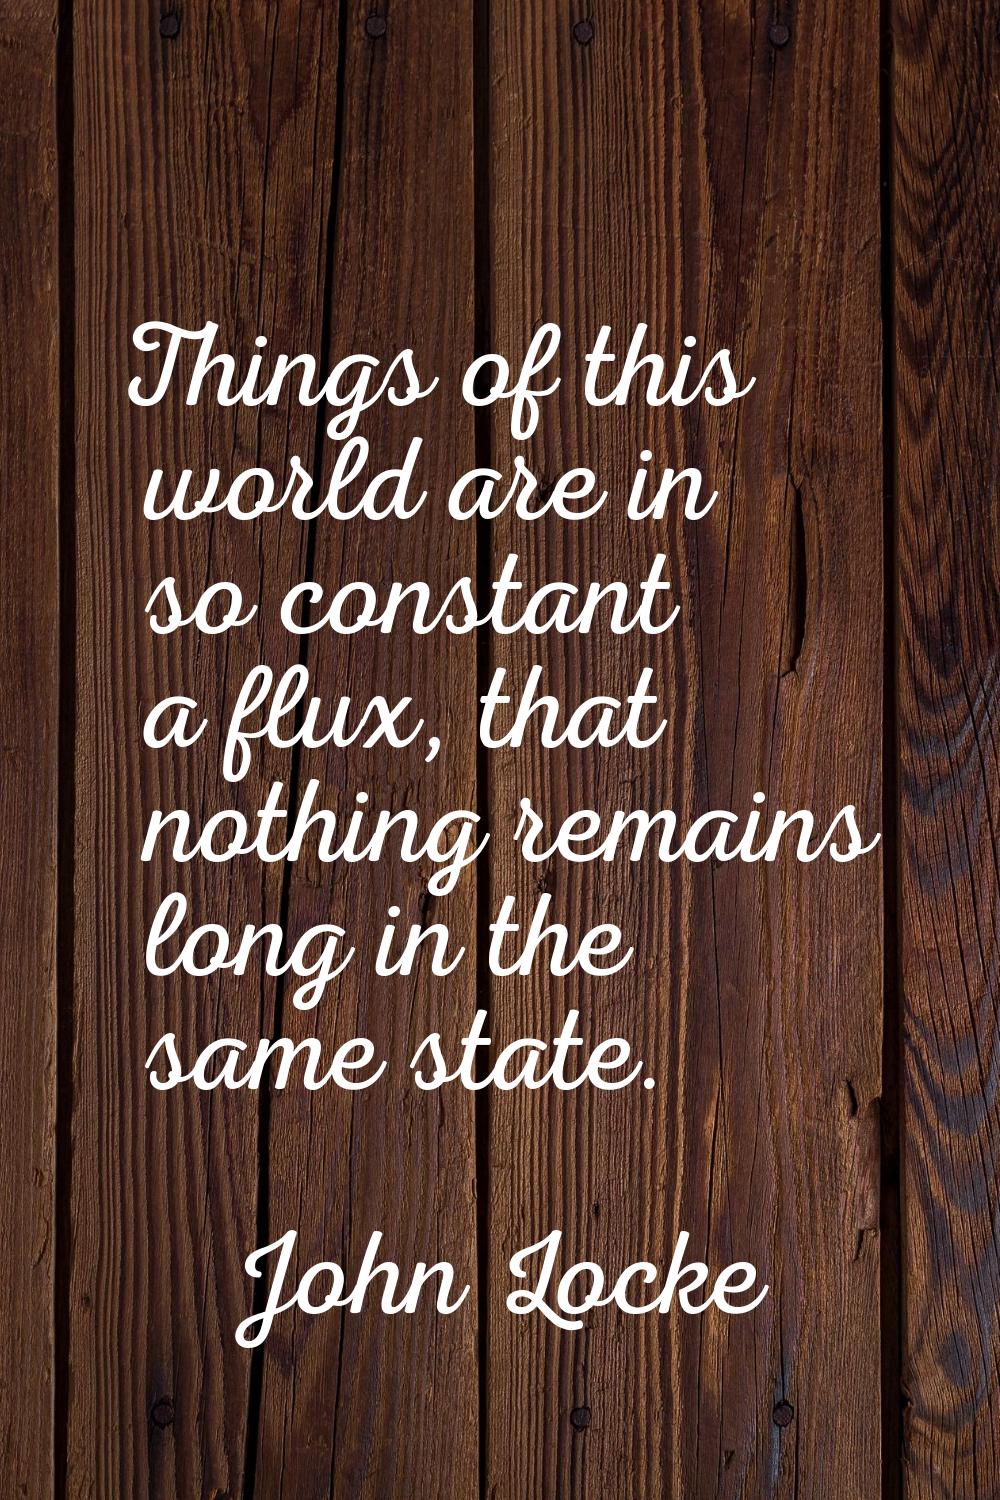 Things of this world are in so constant a flux, that nothing remains long in the same state.